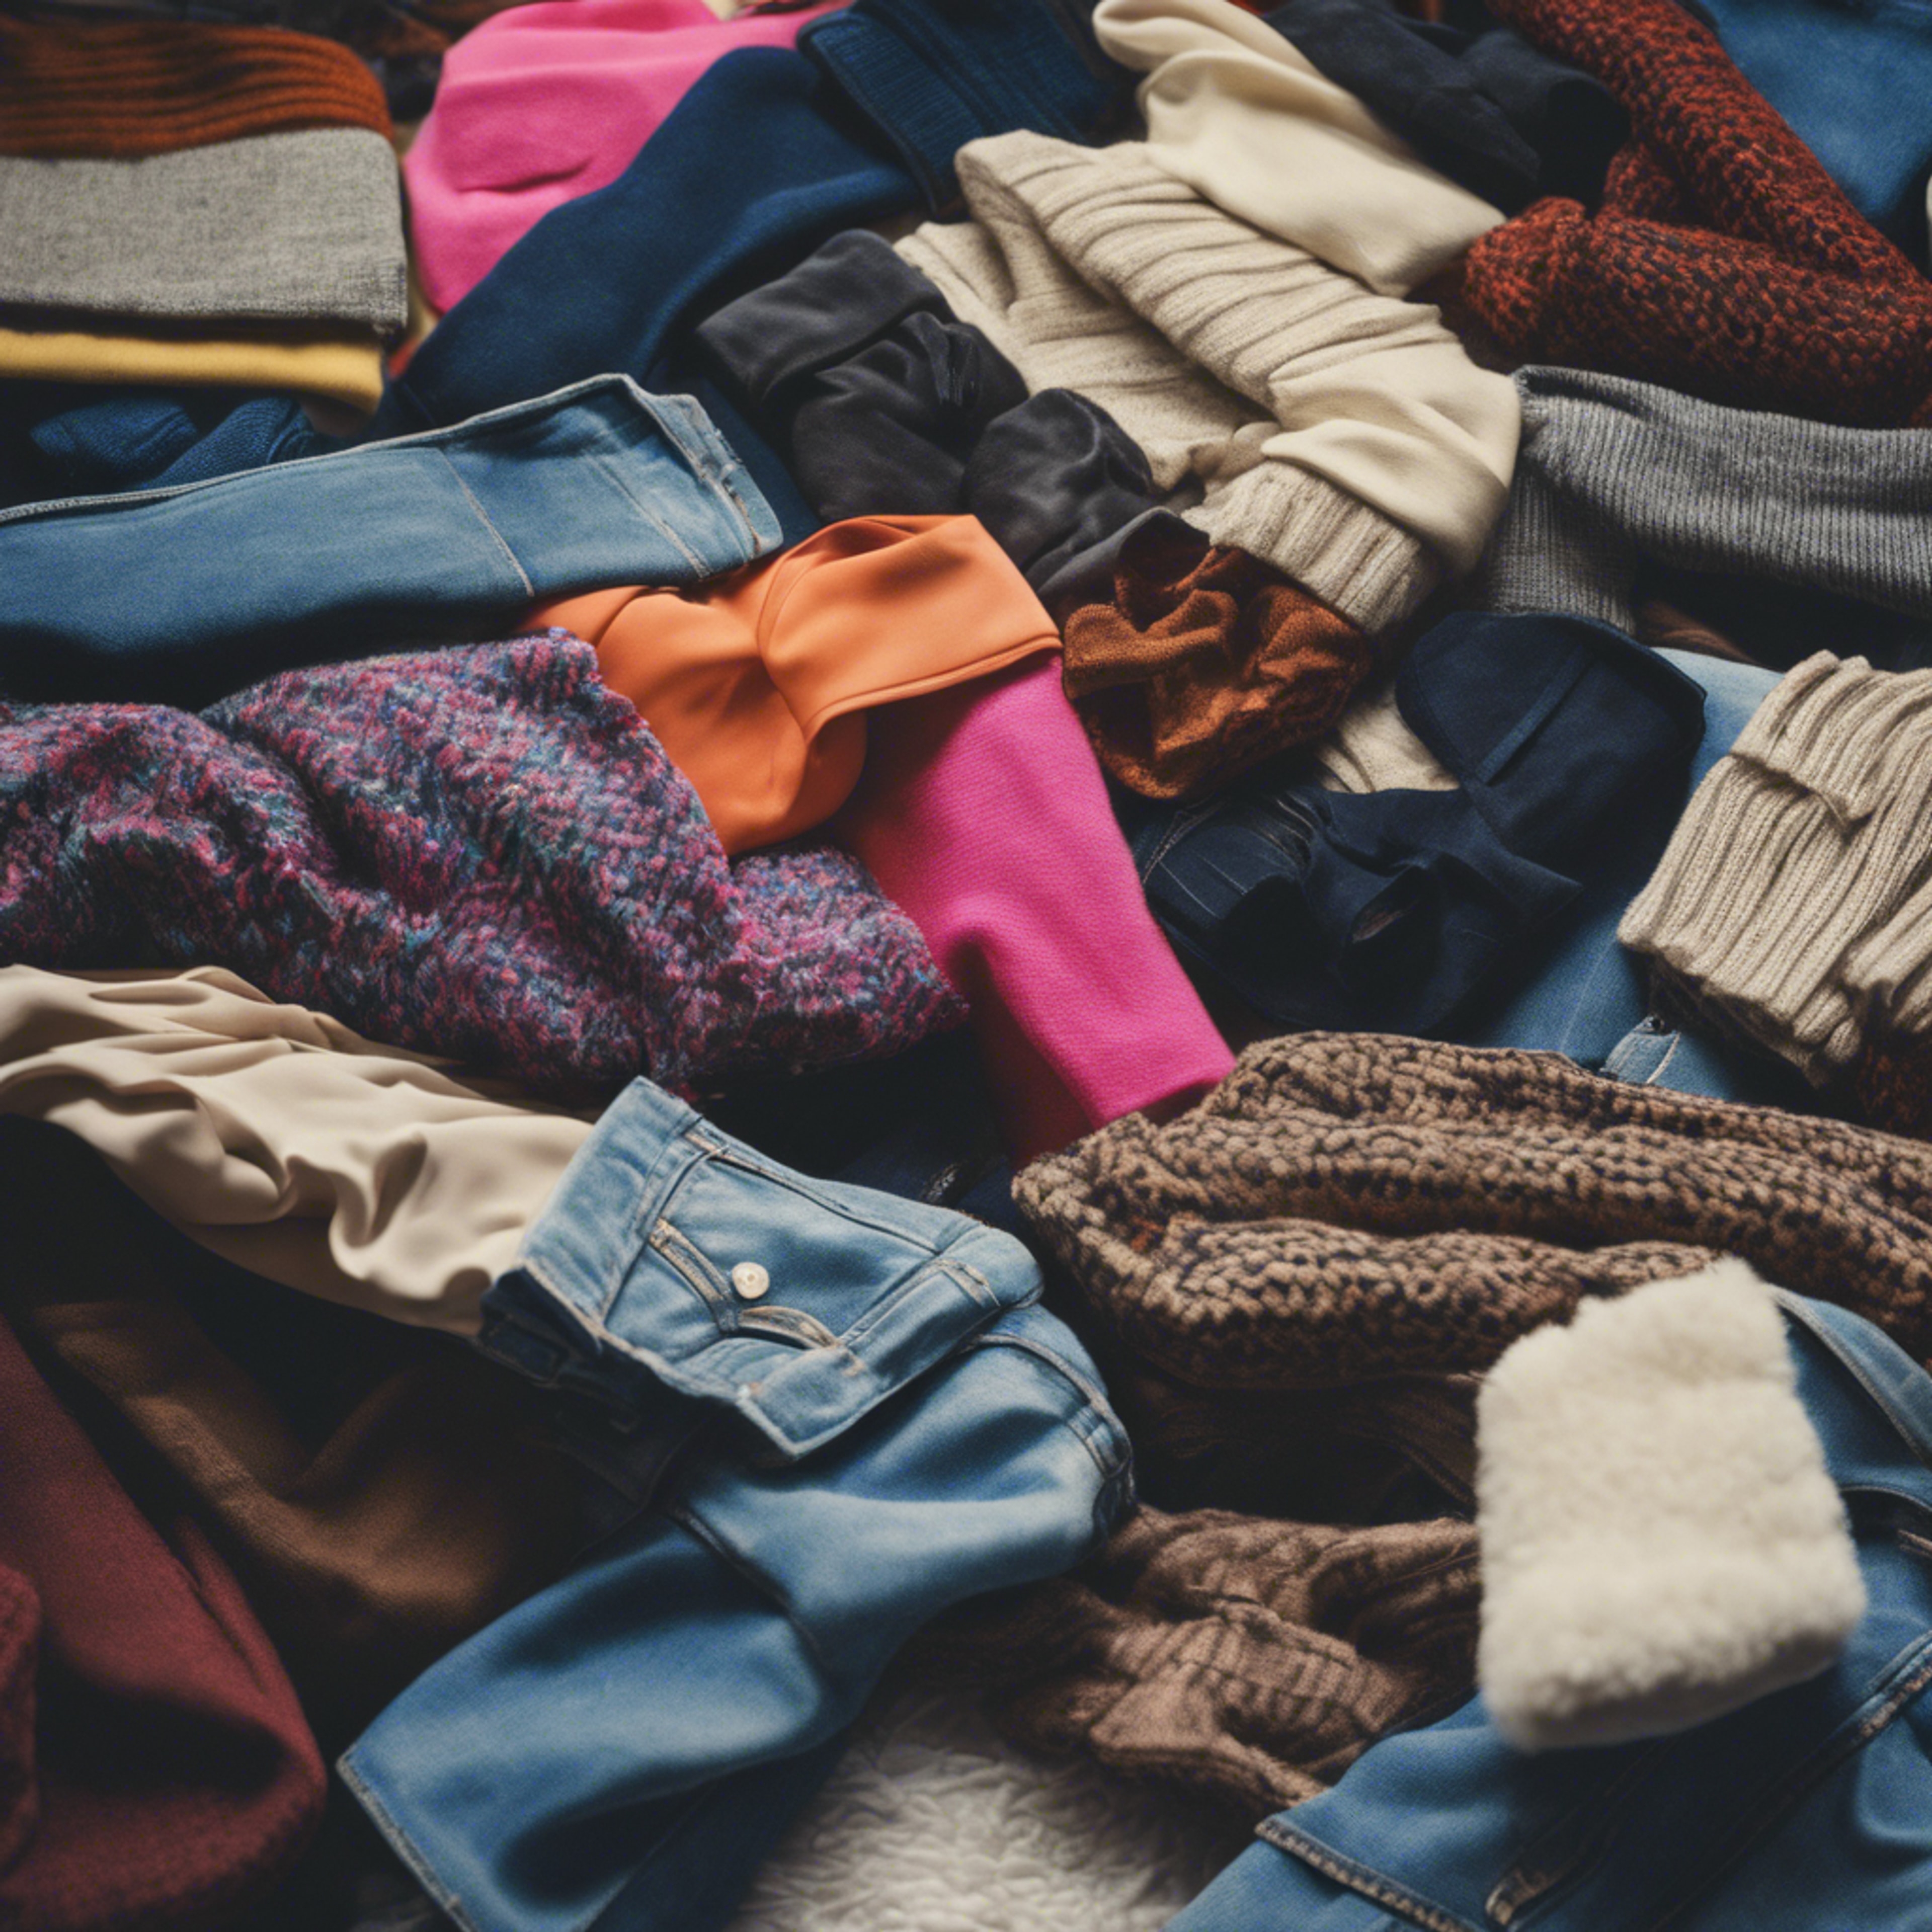 A pile of iconic 80s fashions such as leg warmers, oversized blazers, and high-waisted jeans. Tapet[dbd69f645b7844d6a4c4]